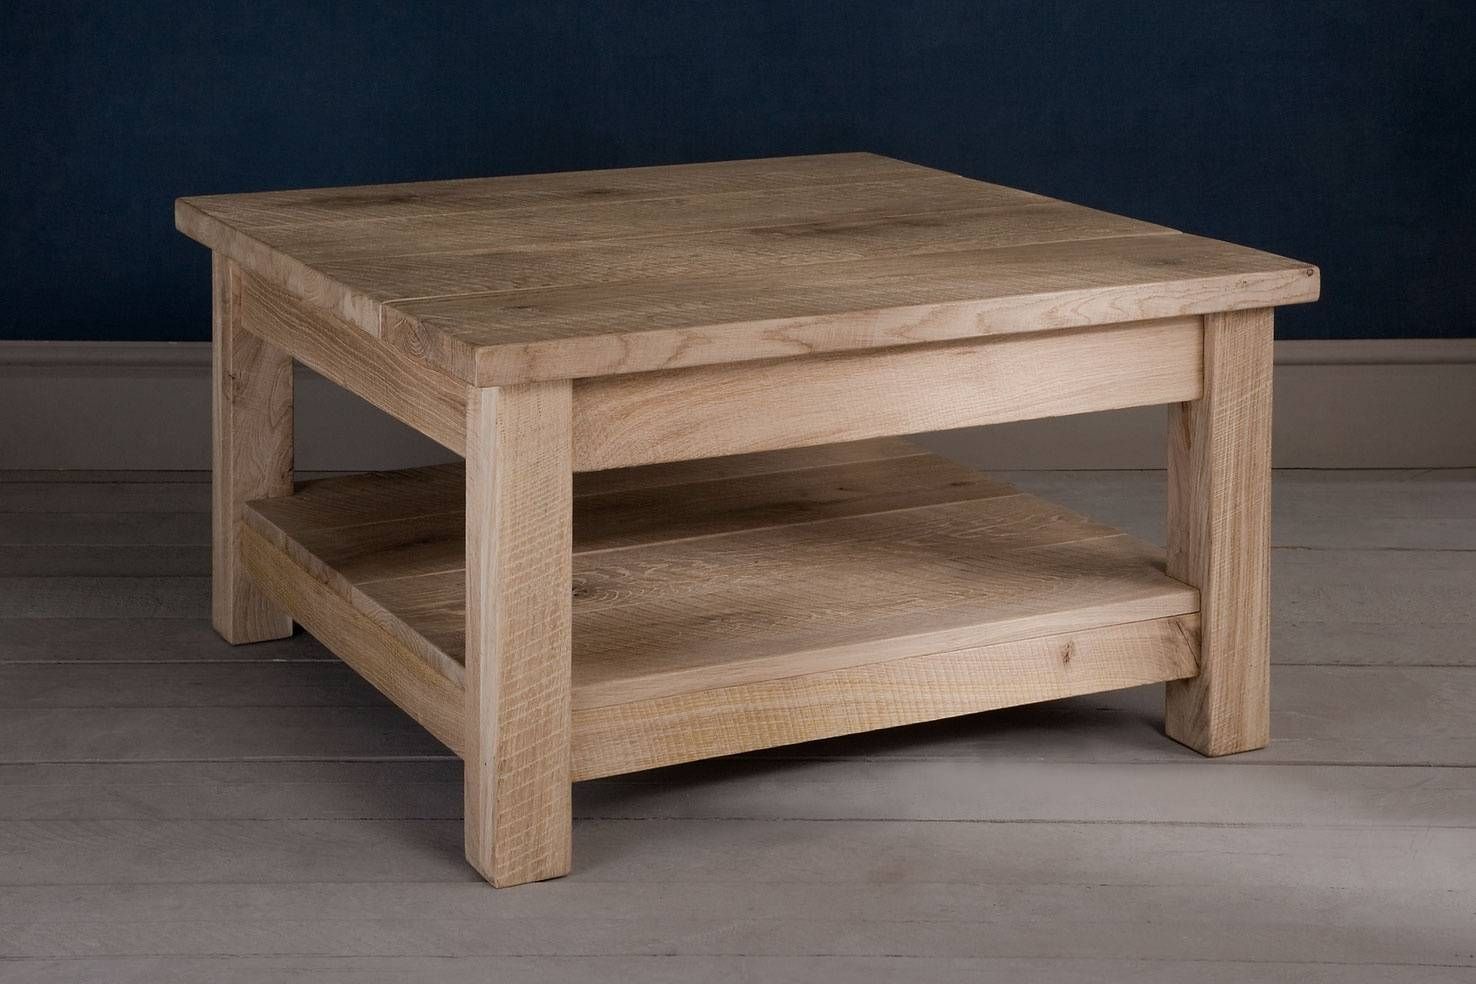 Coffee Table: Marvellous Oak Coffee Table Designs Oak End Tables Intended For Square Oak Coffee Tables (View 13 of 30)